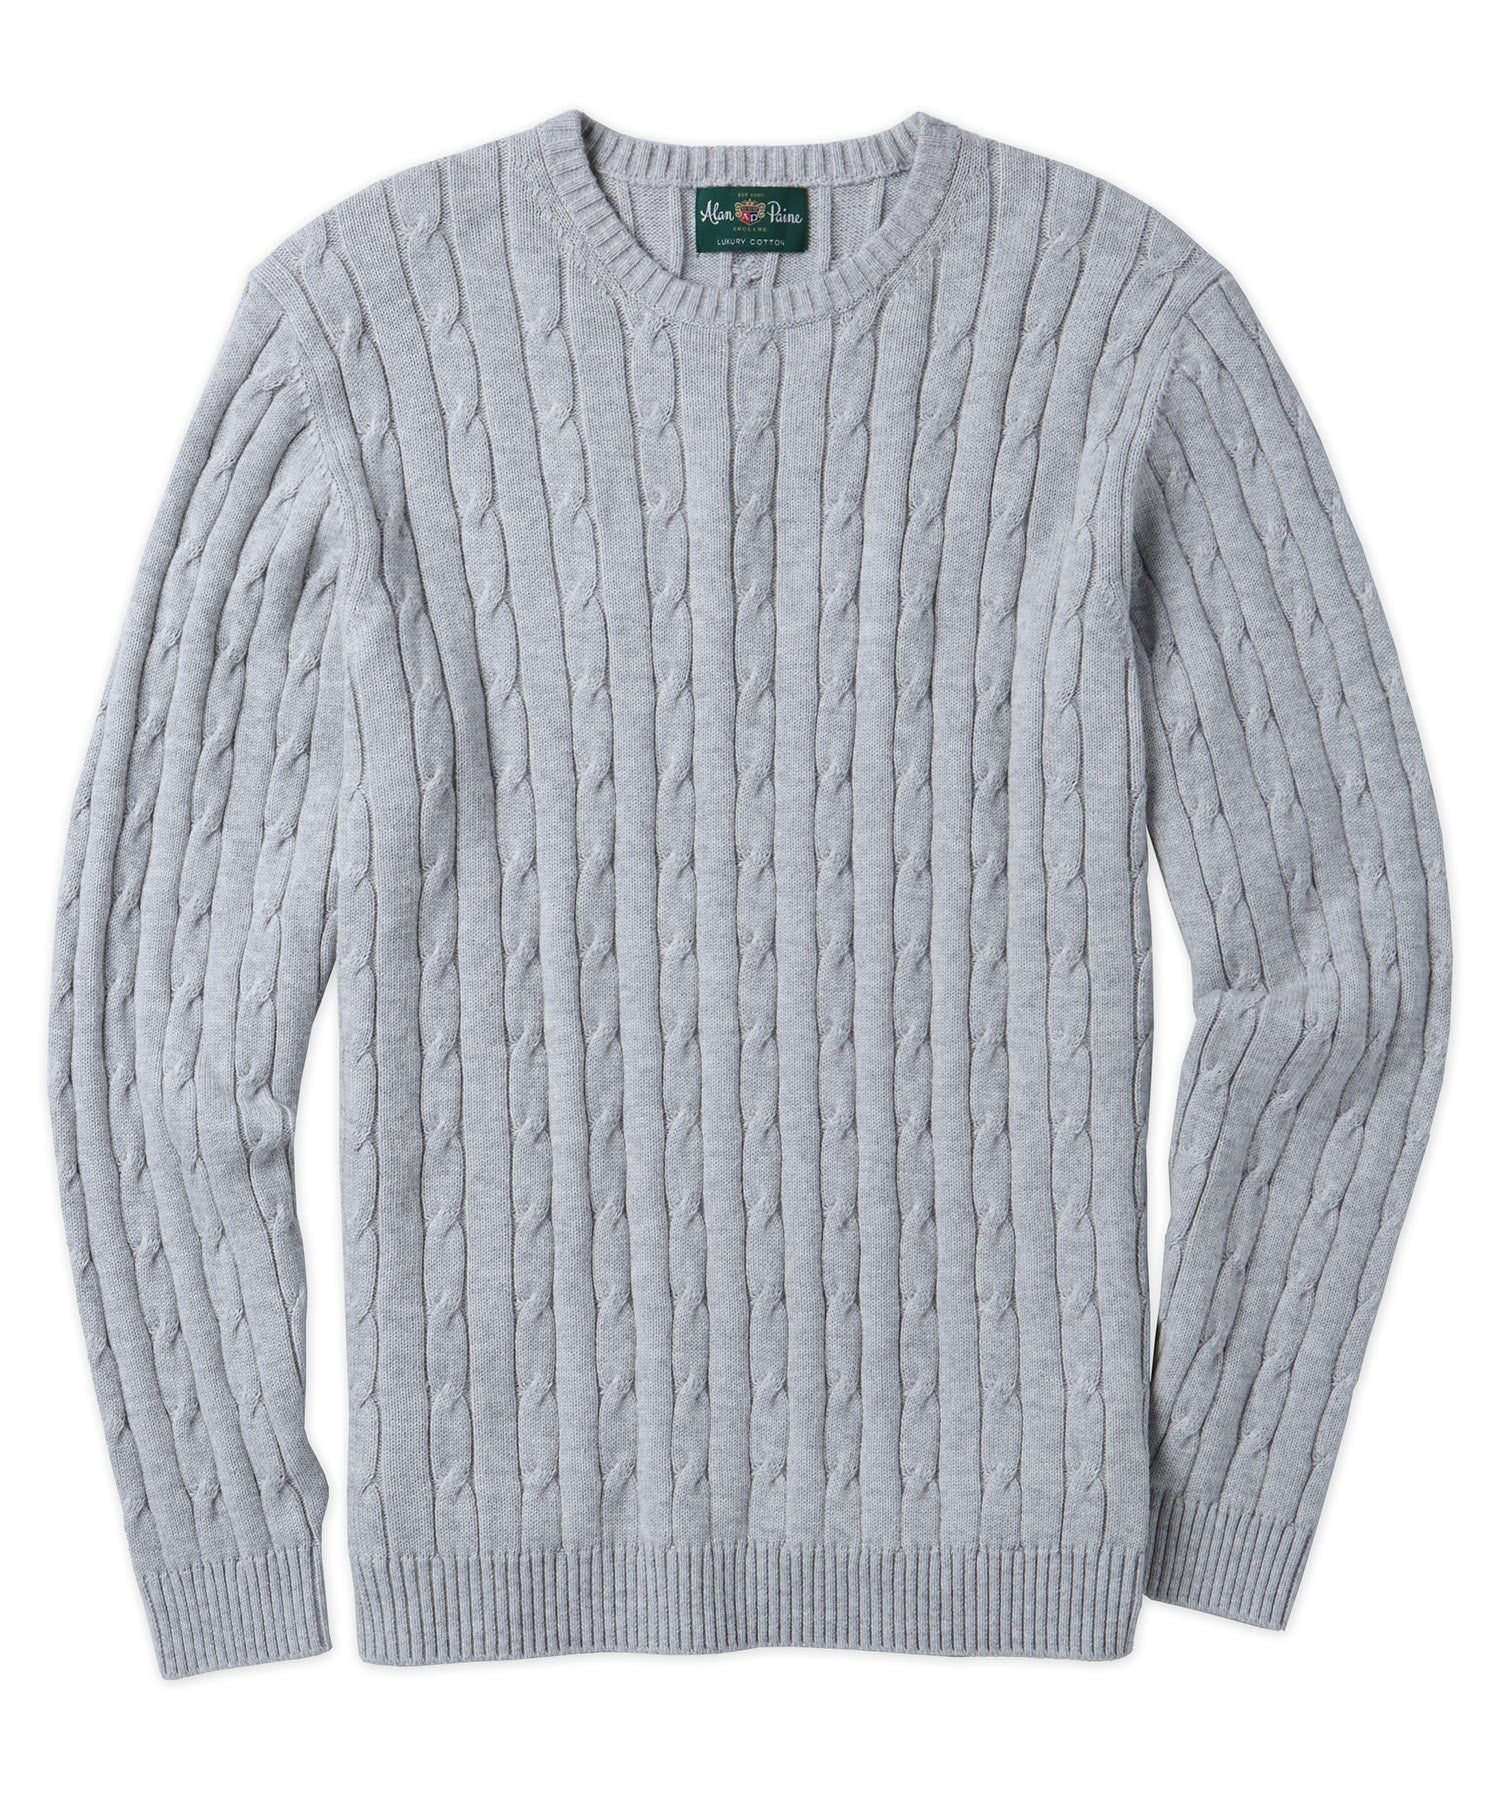 Cable-knit cashmere sweater